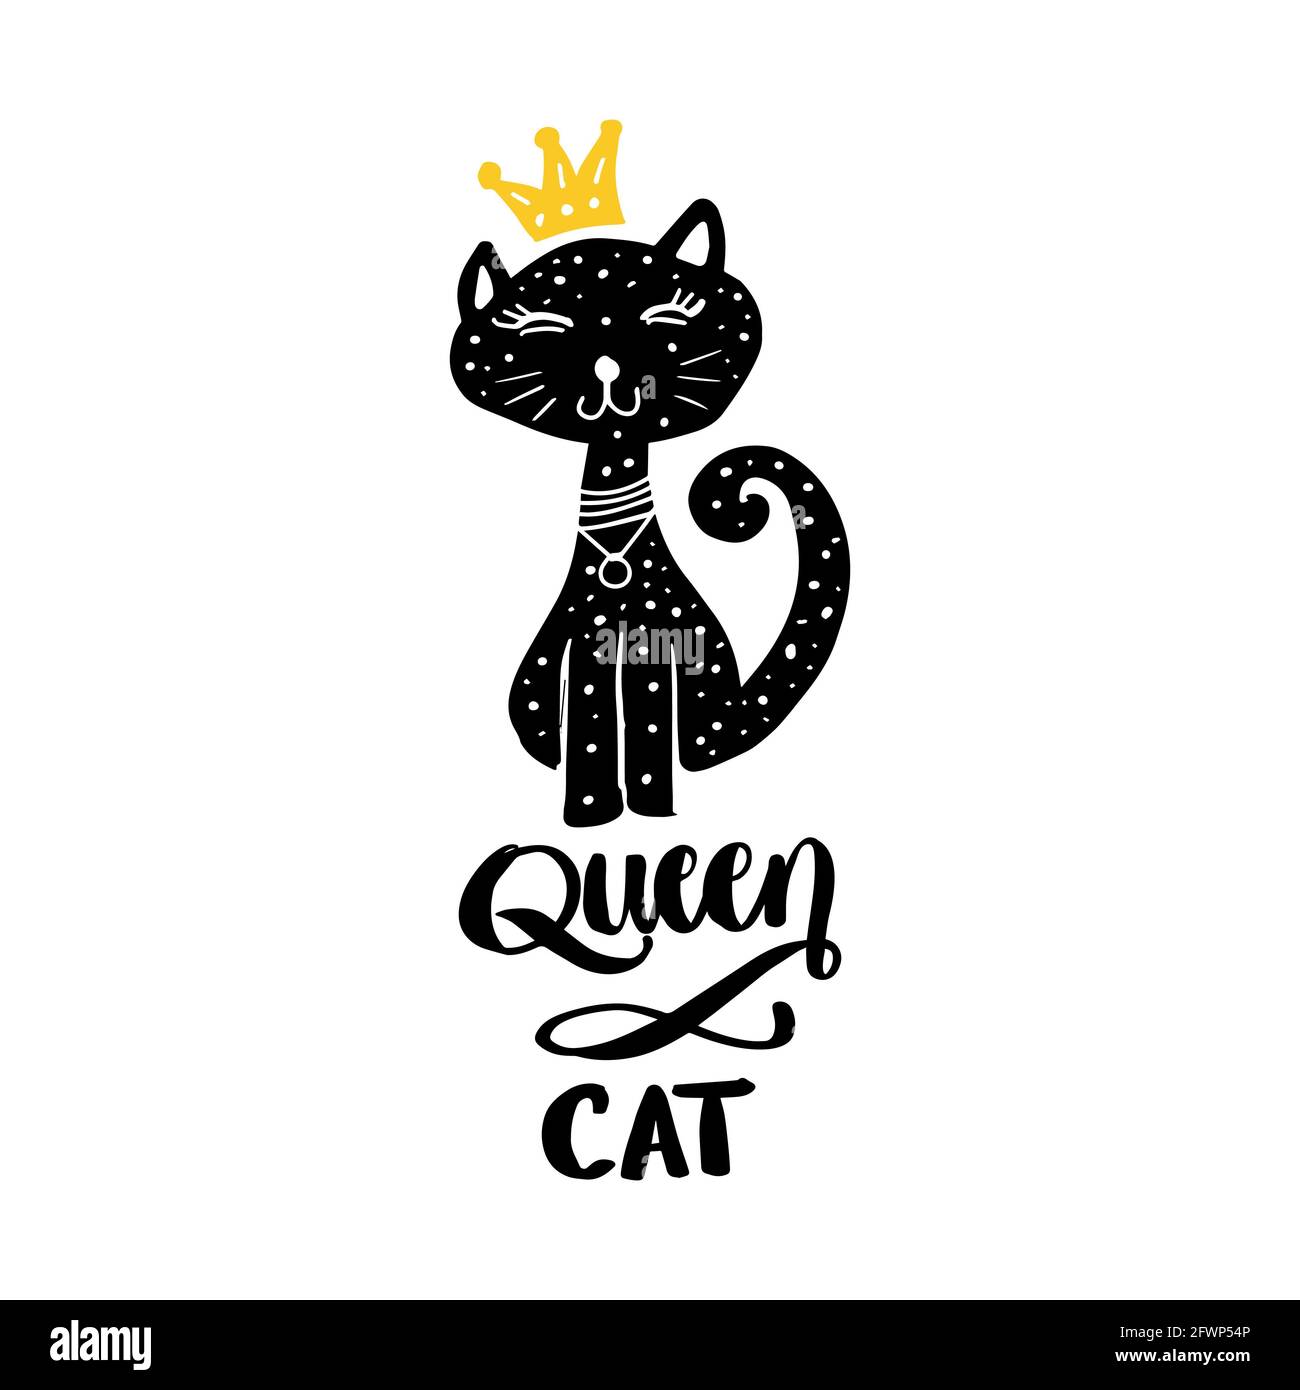 Queen cat  hand lettering. Fashion print black cat with crown. Stock Photo